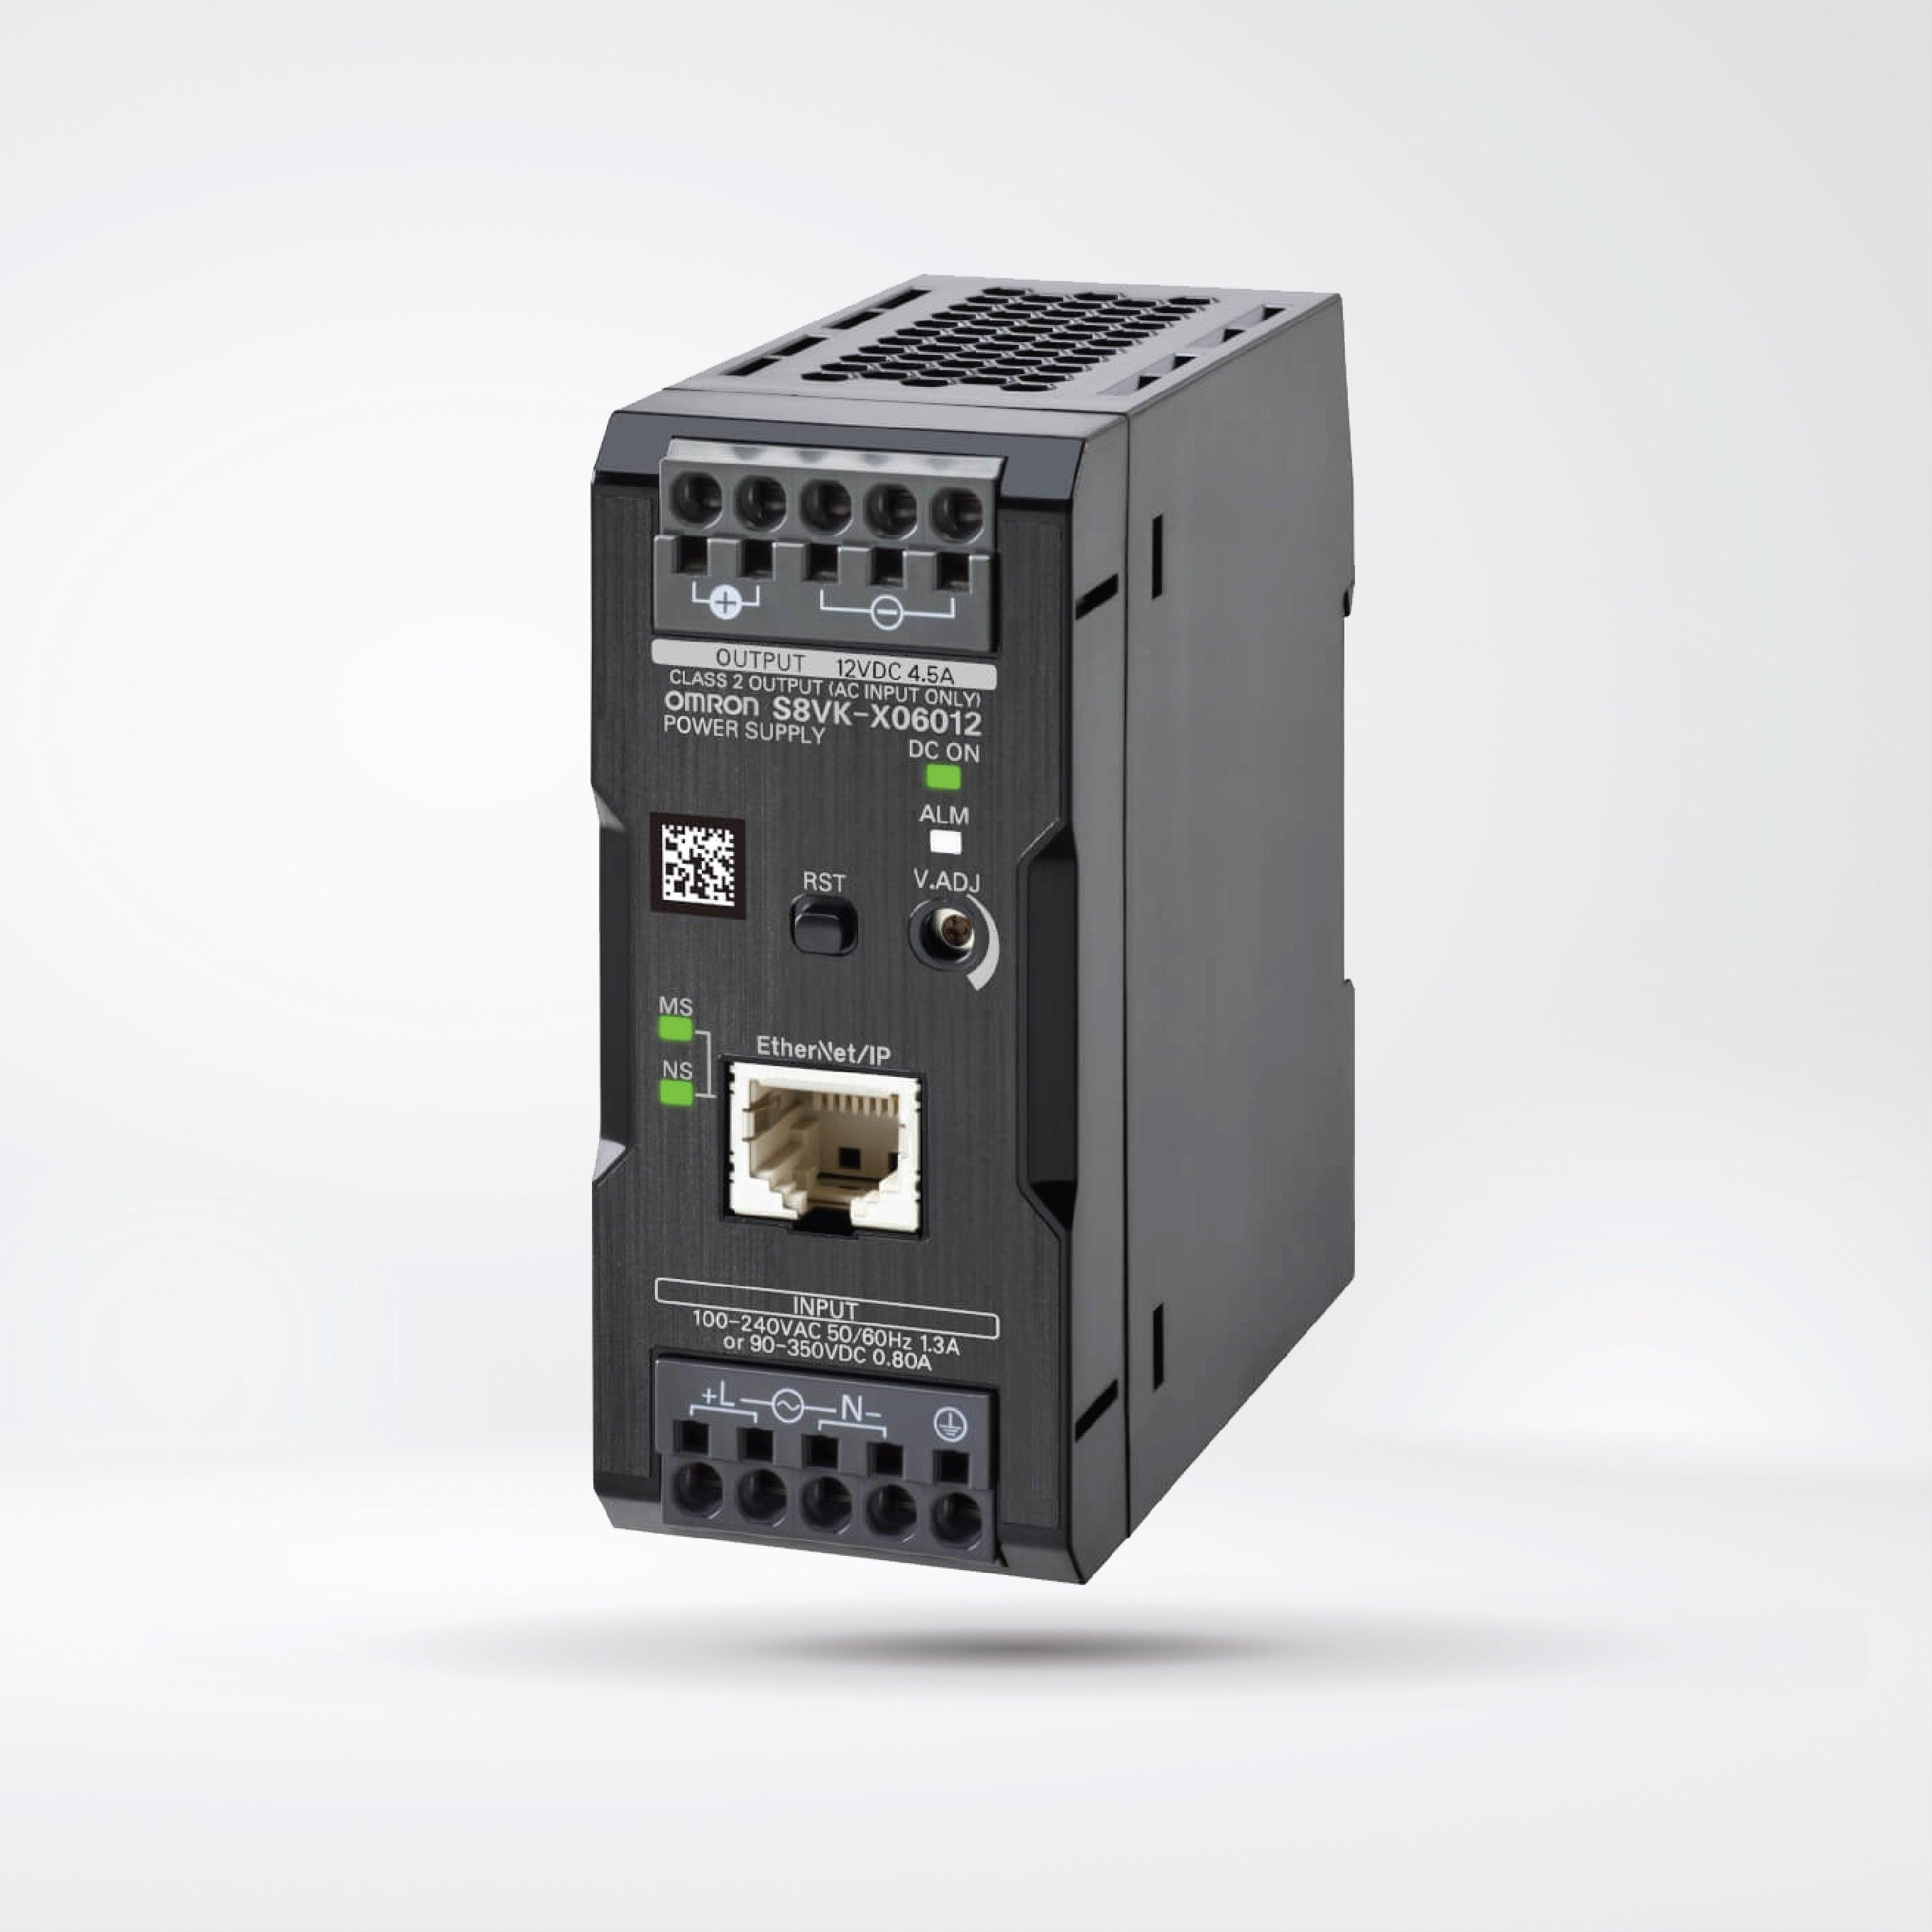 S8VK-X06012-EIP Switch Mode Power Supply,with EtherNet/IP, Modbus TCP, 60 W, 12 VDC - Riverplus